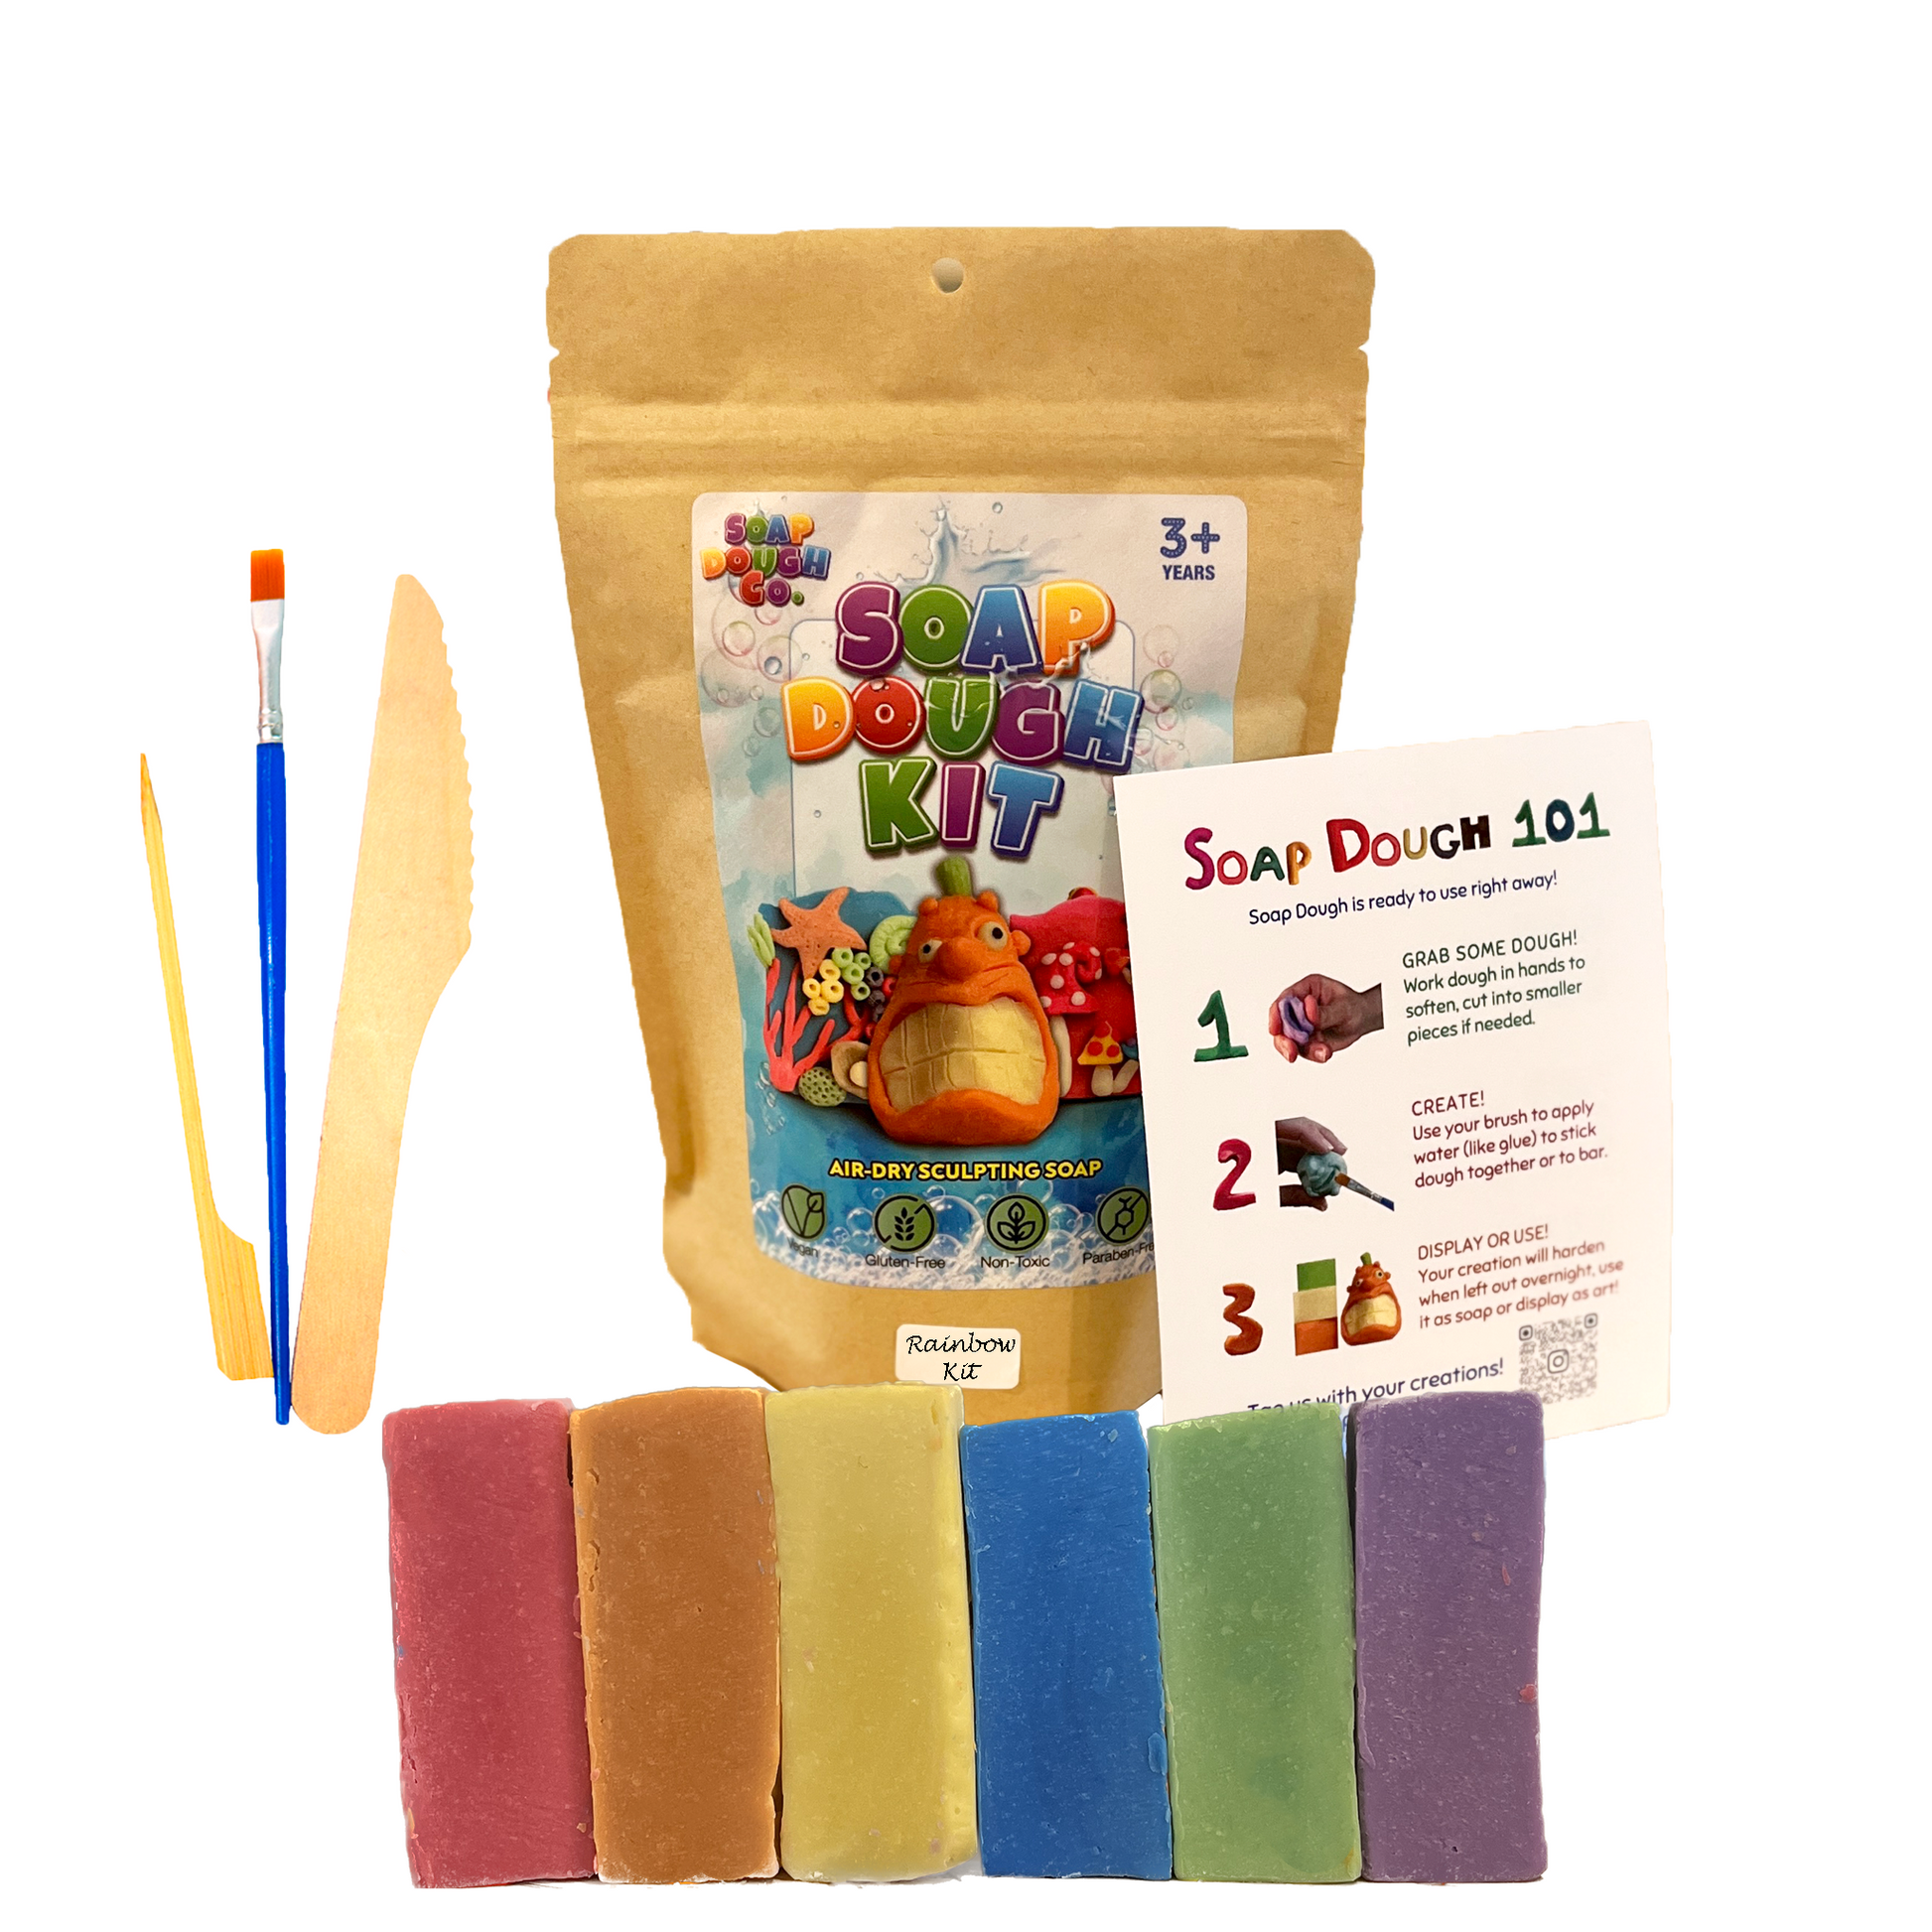 Soap Dough Co. - Rainbow Kit - Wall of yellow, purple, green, orange, blue, and red with eco-bag, instructions, and tools next to soap dough.